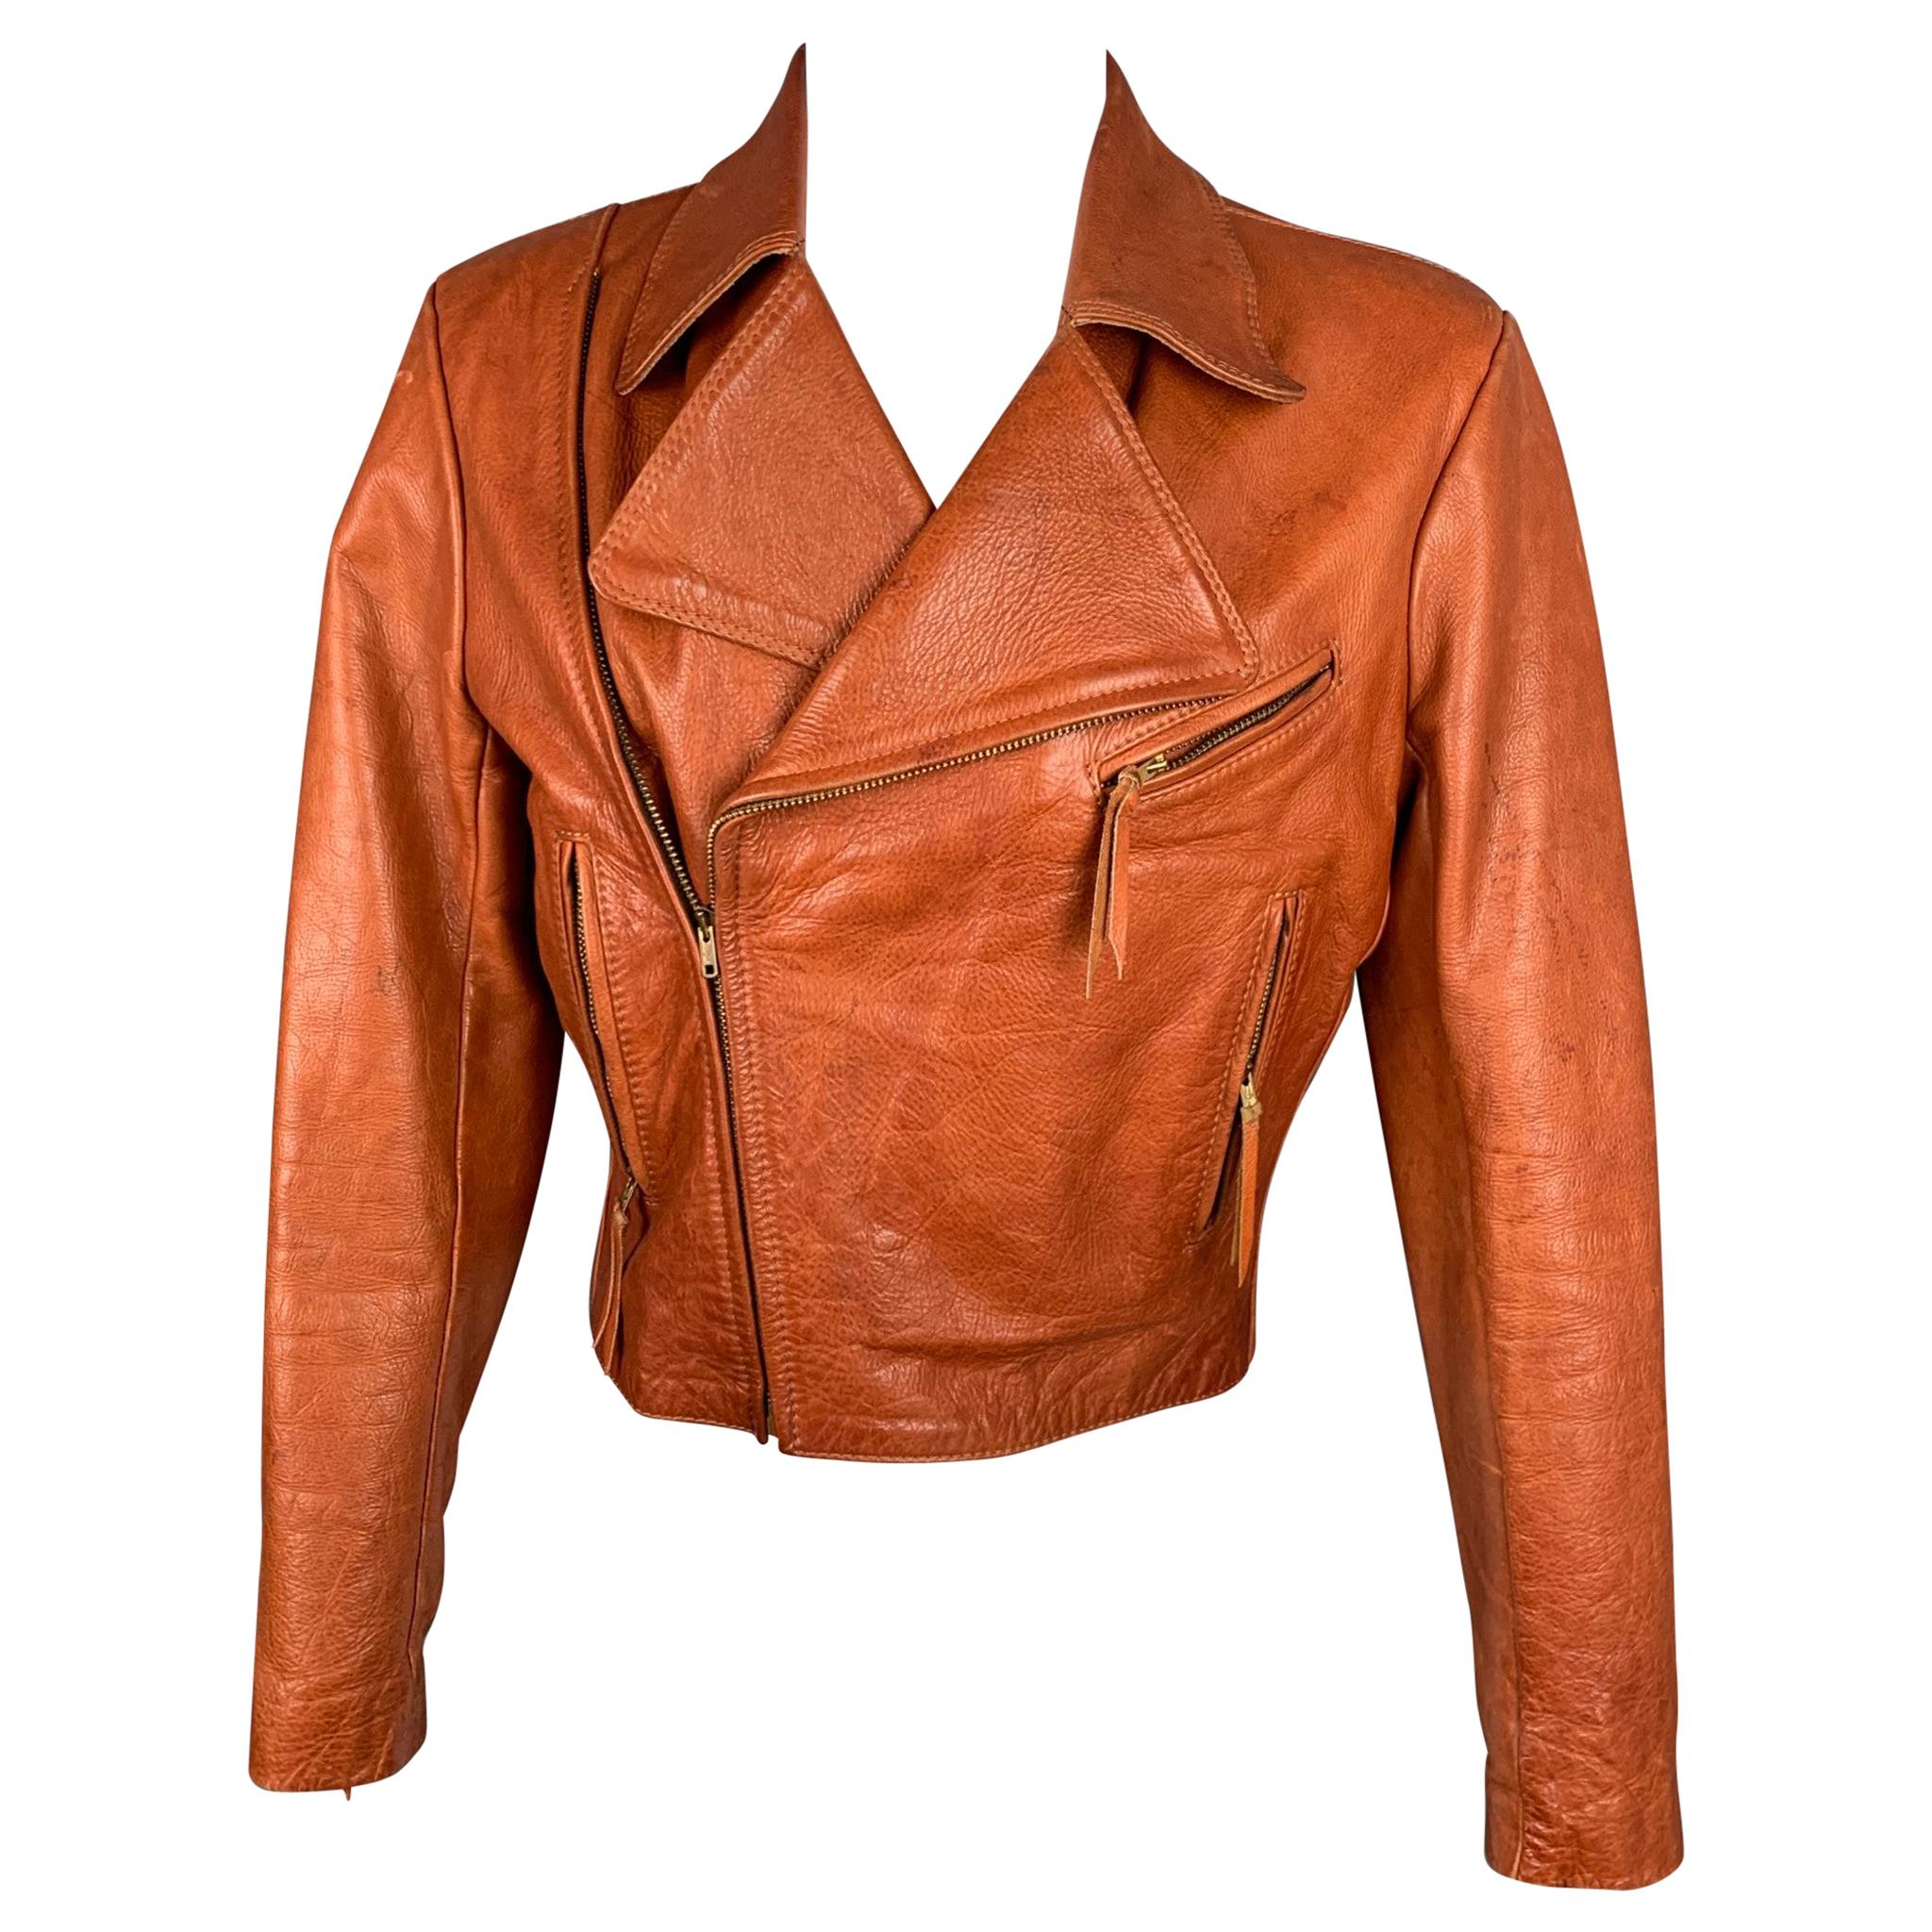 GLASSWATER Size S Cognac Leather Vintage 70's Motorcycle Jacket